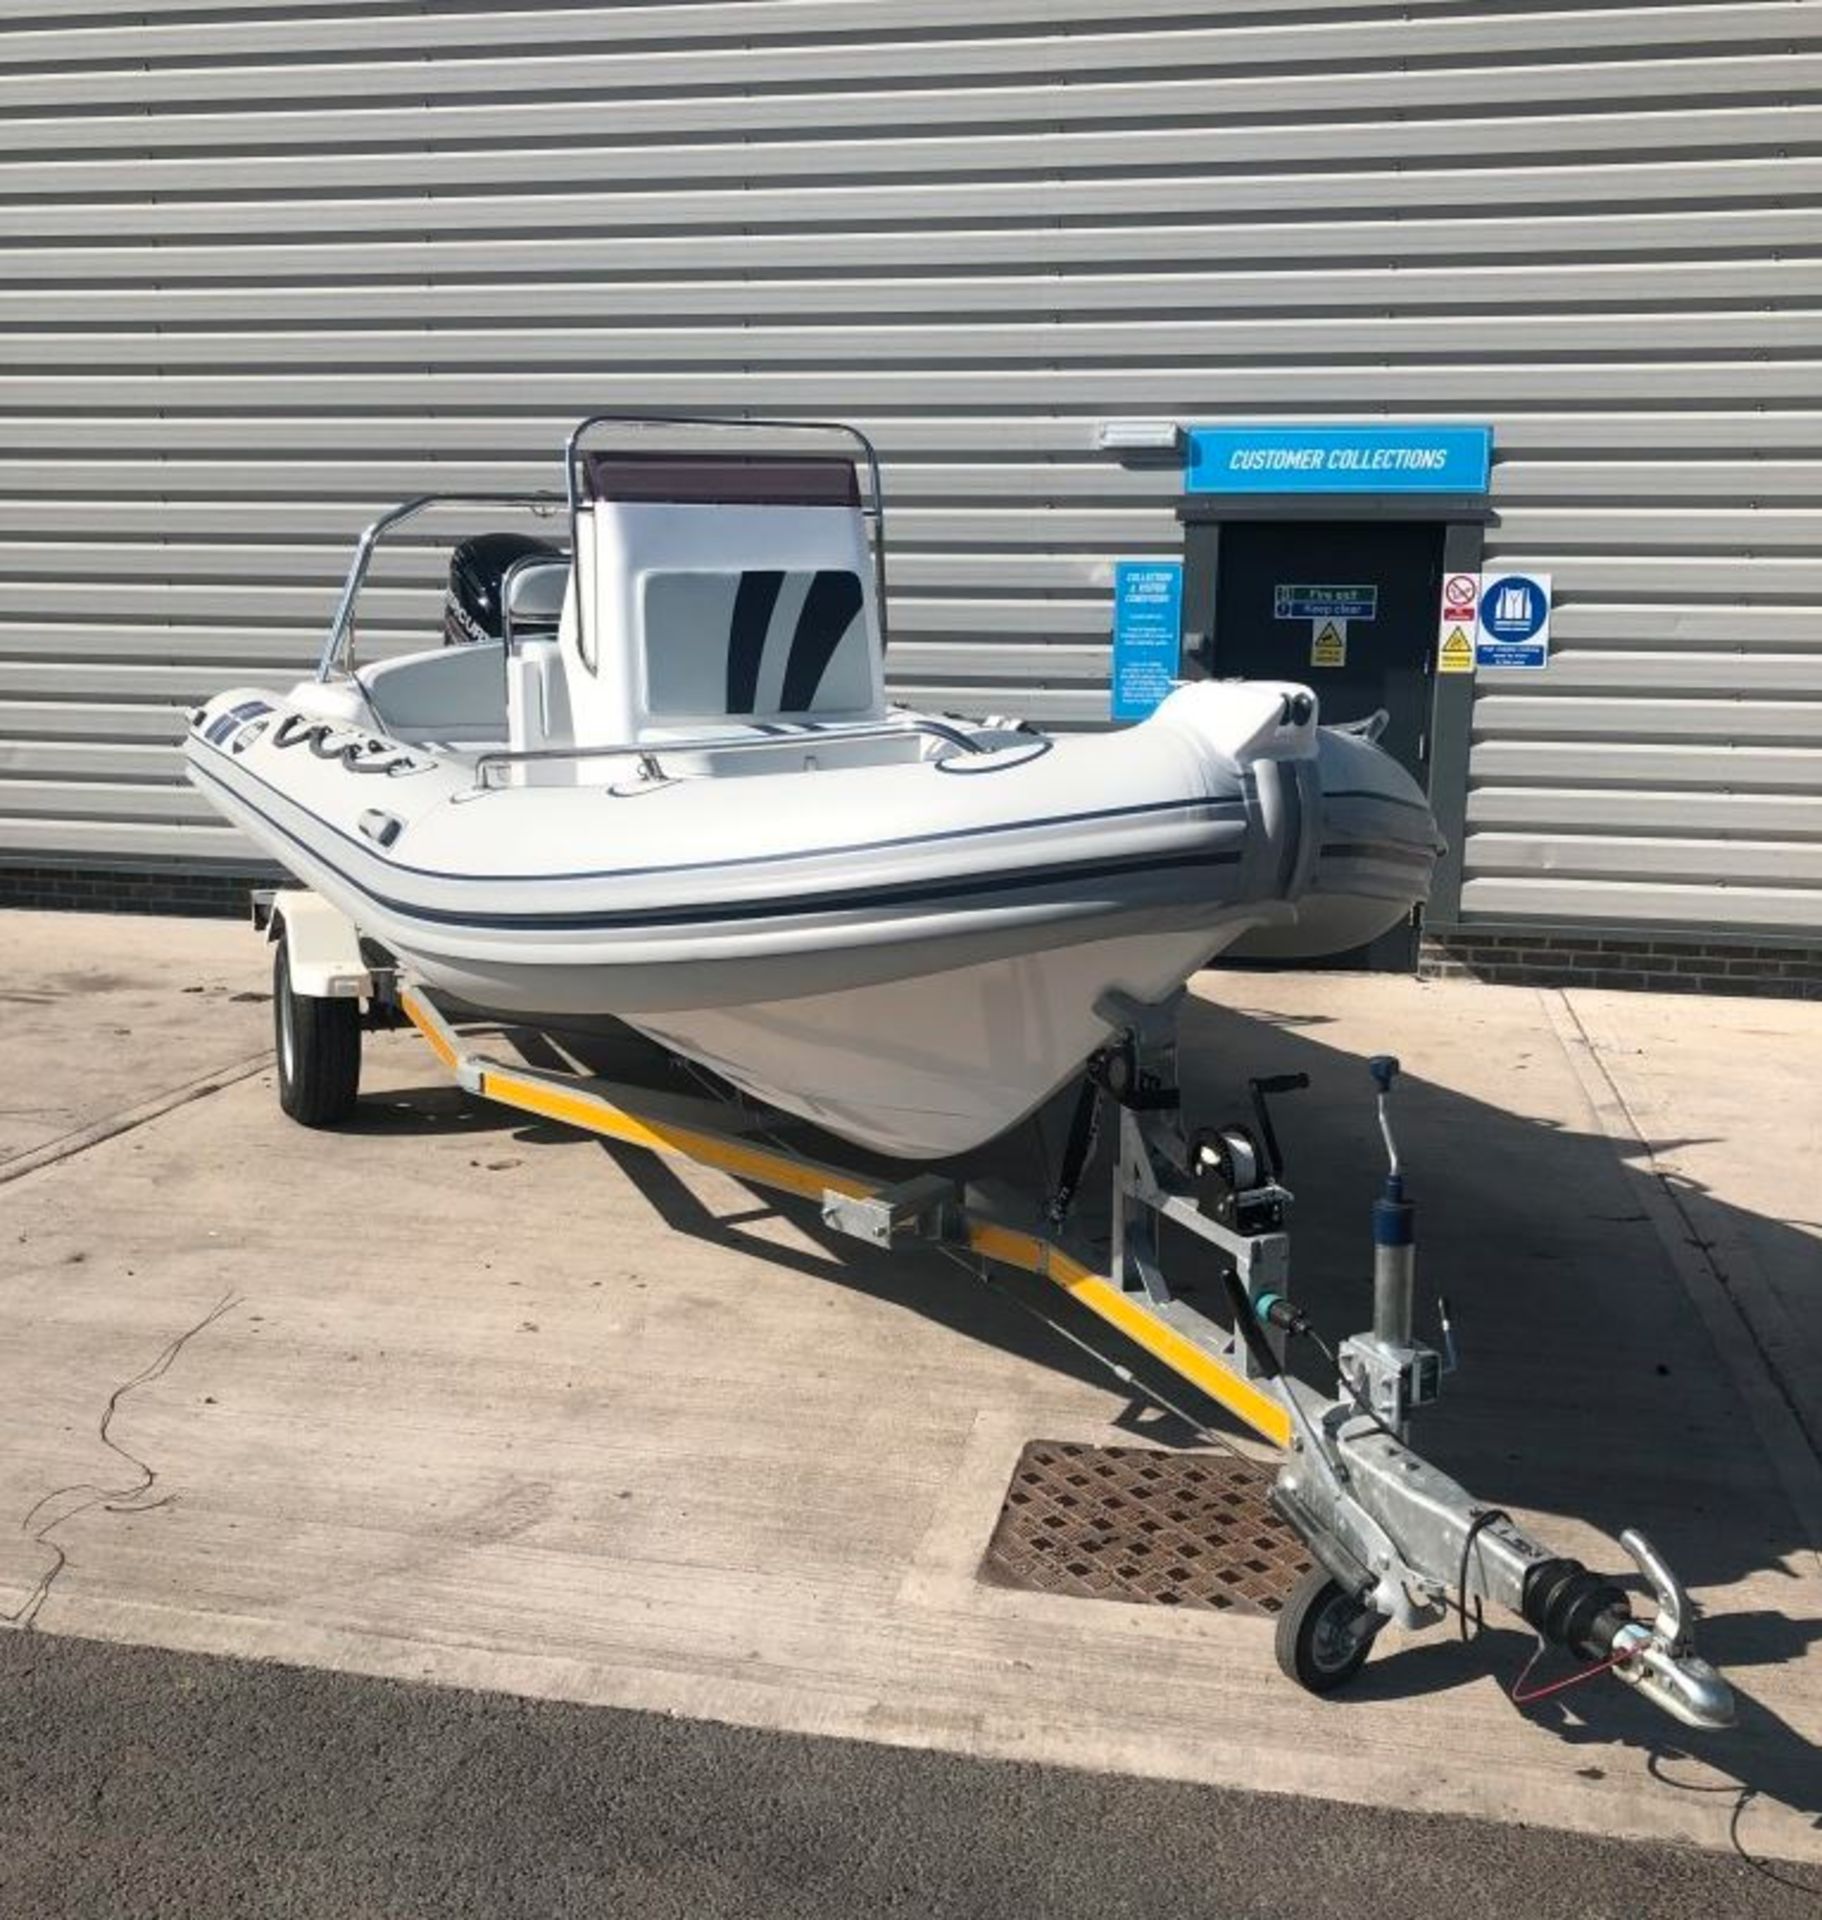 Infanta 5.8LRi Rib Complete With 115hp Mercury 4stroke and Trailer {104270} - Image 2 of 17